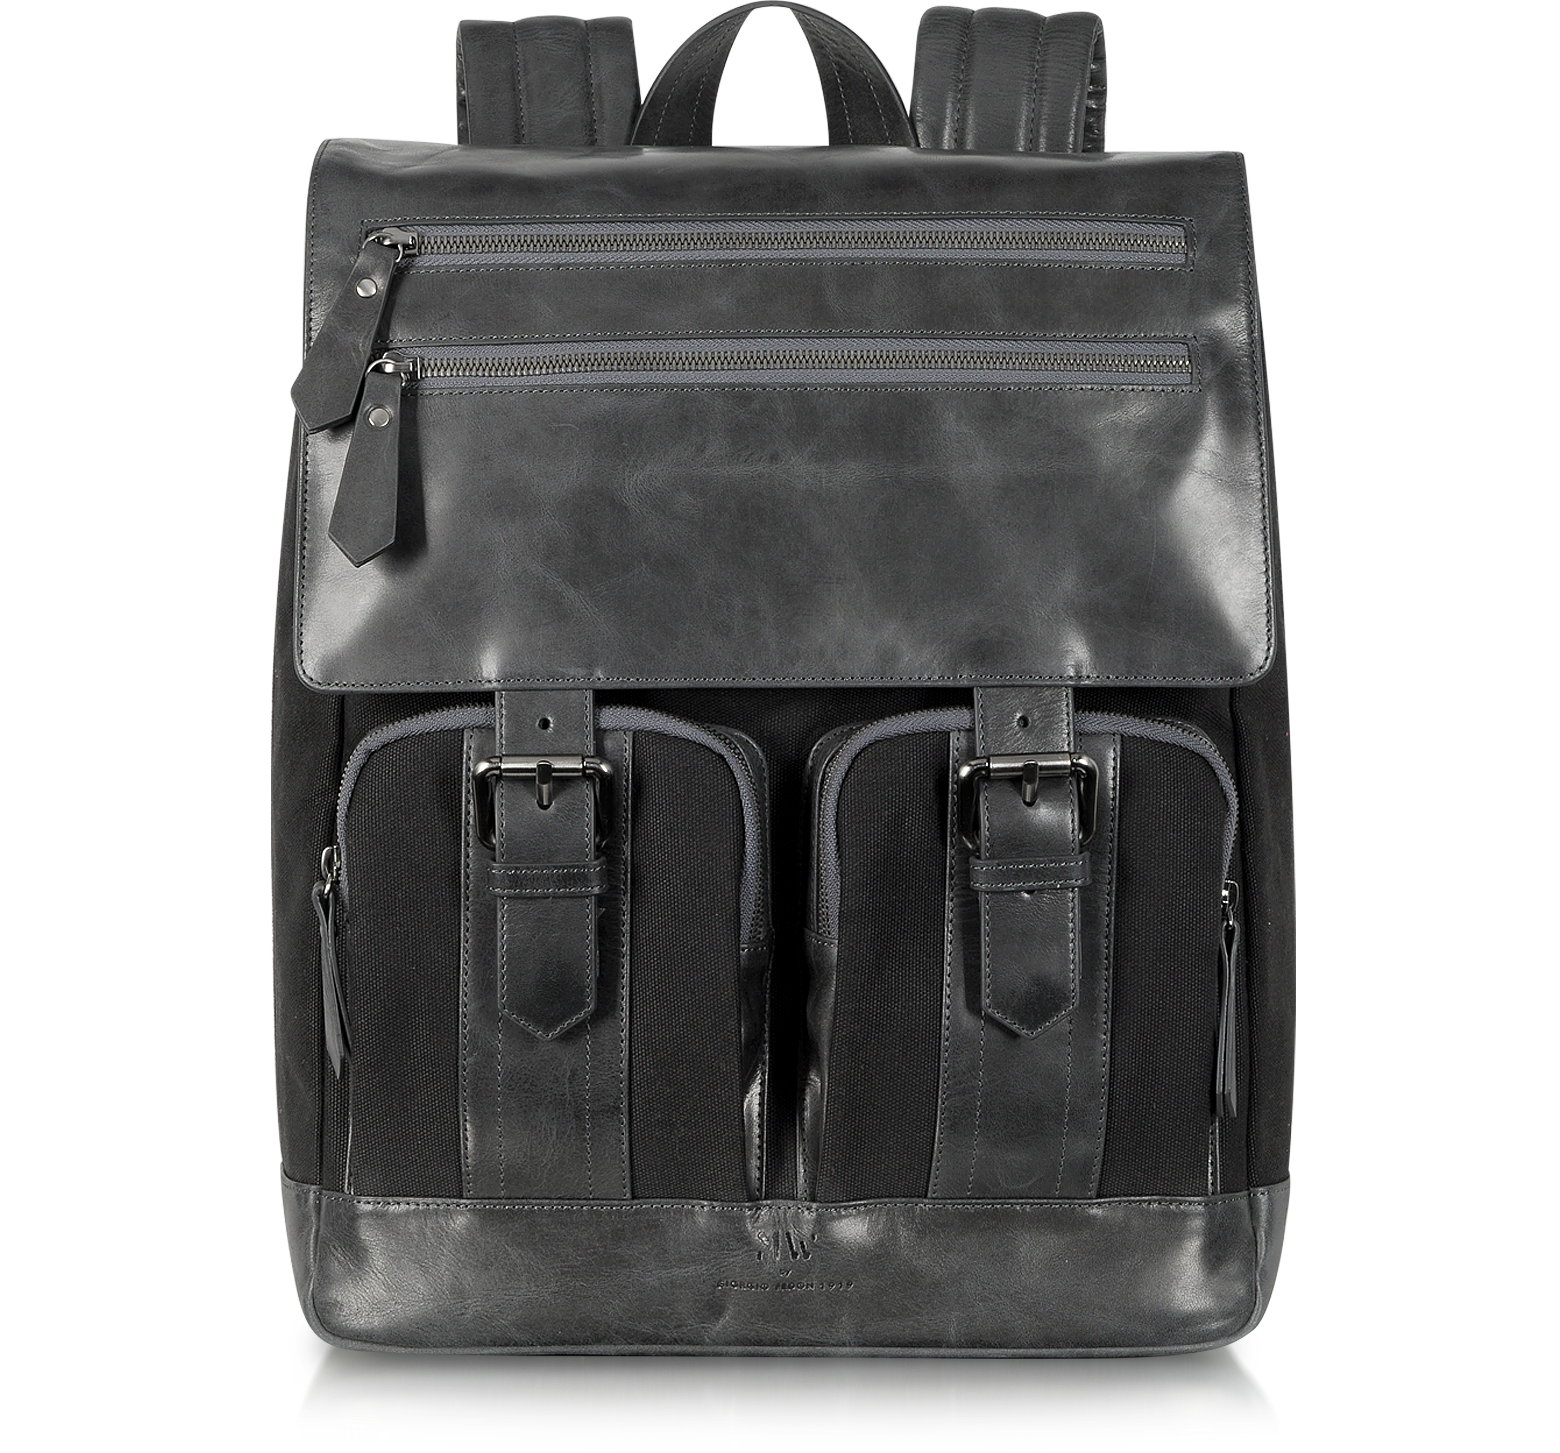 Giorgio Fedon 1919 Black MW Canvas and Leather Backpack at FORZIERI